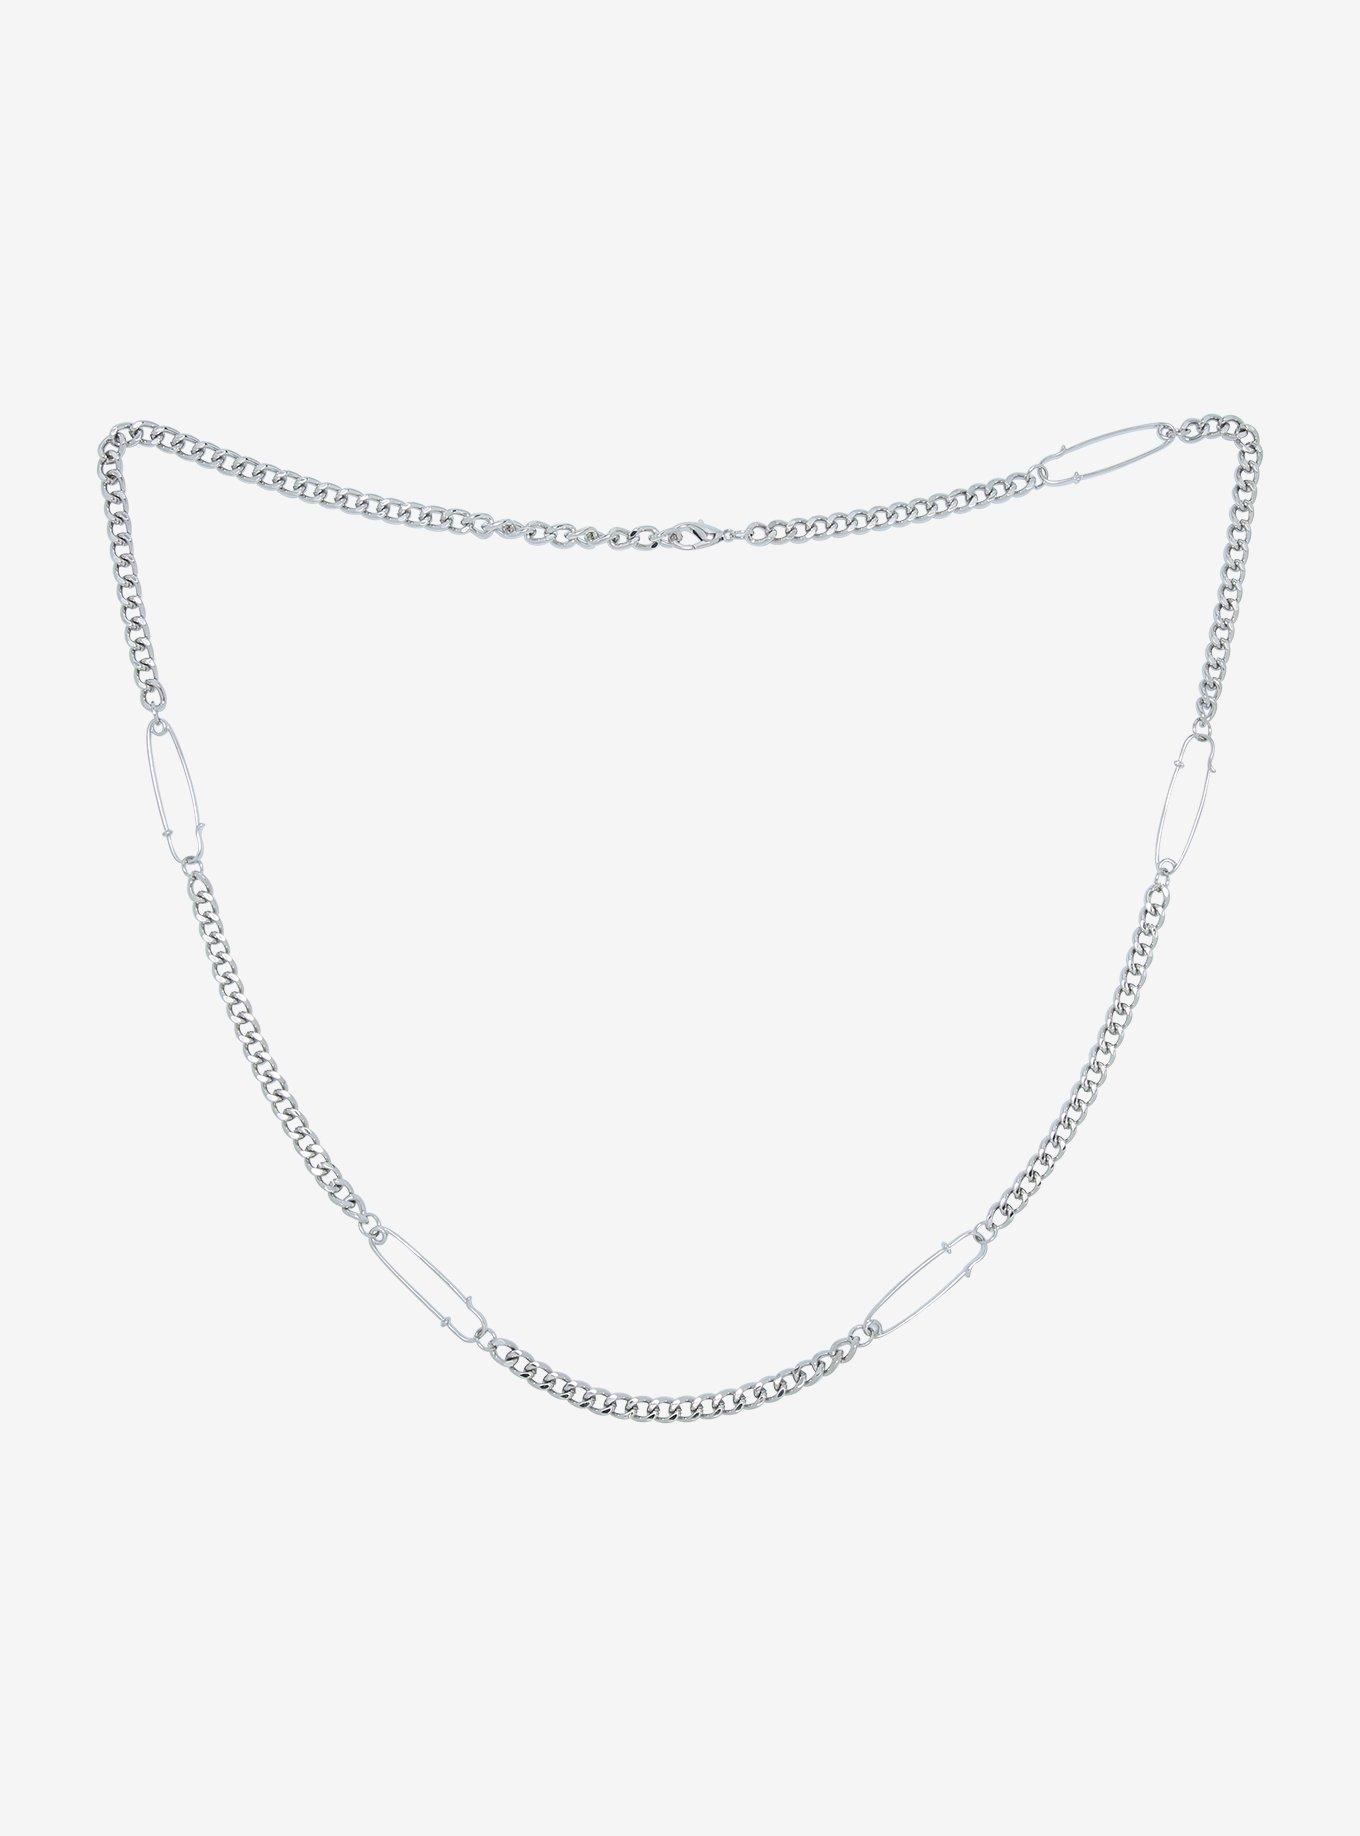 Safety Pin Chain Belt, SILVER, hi-res